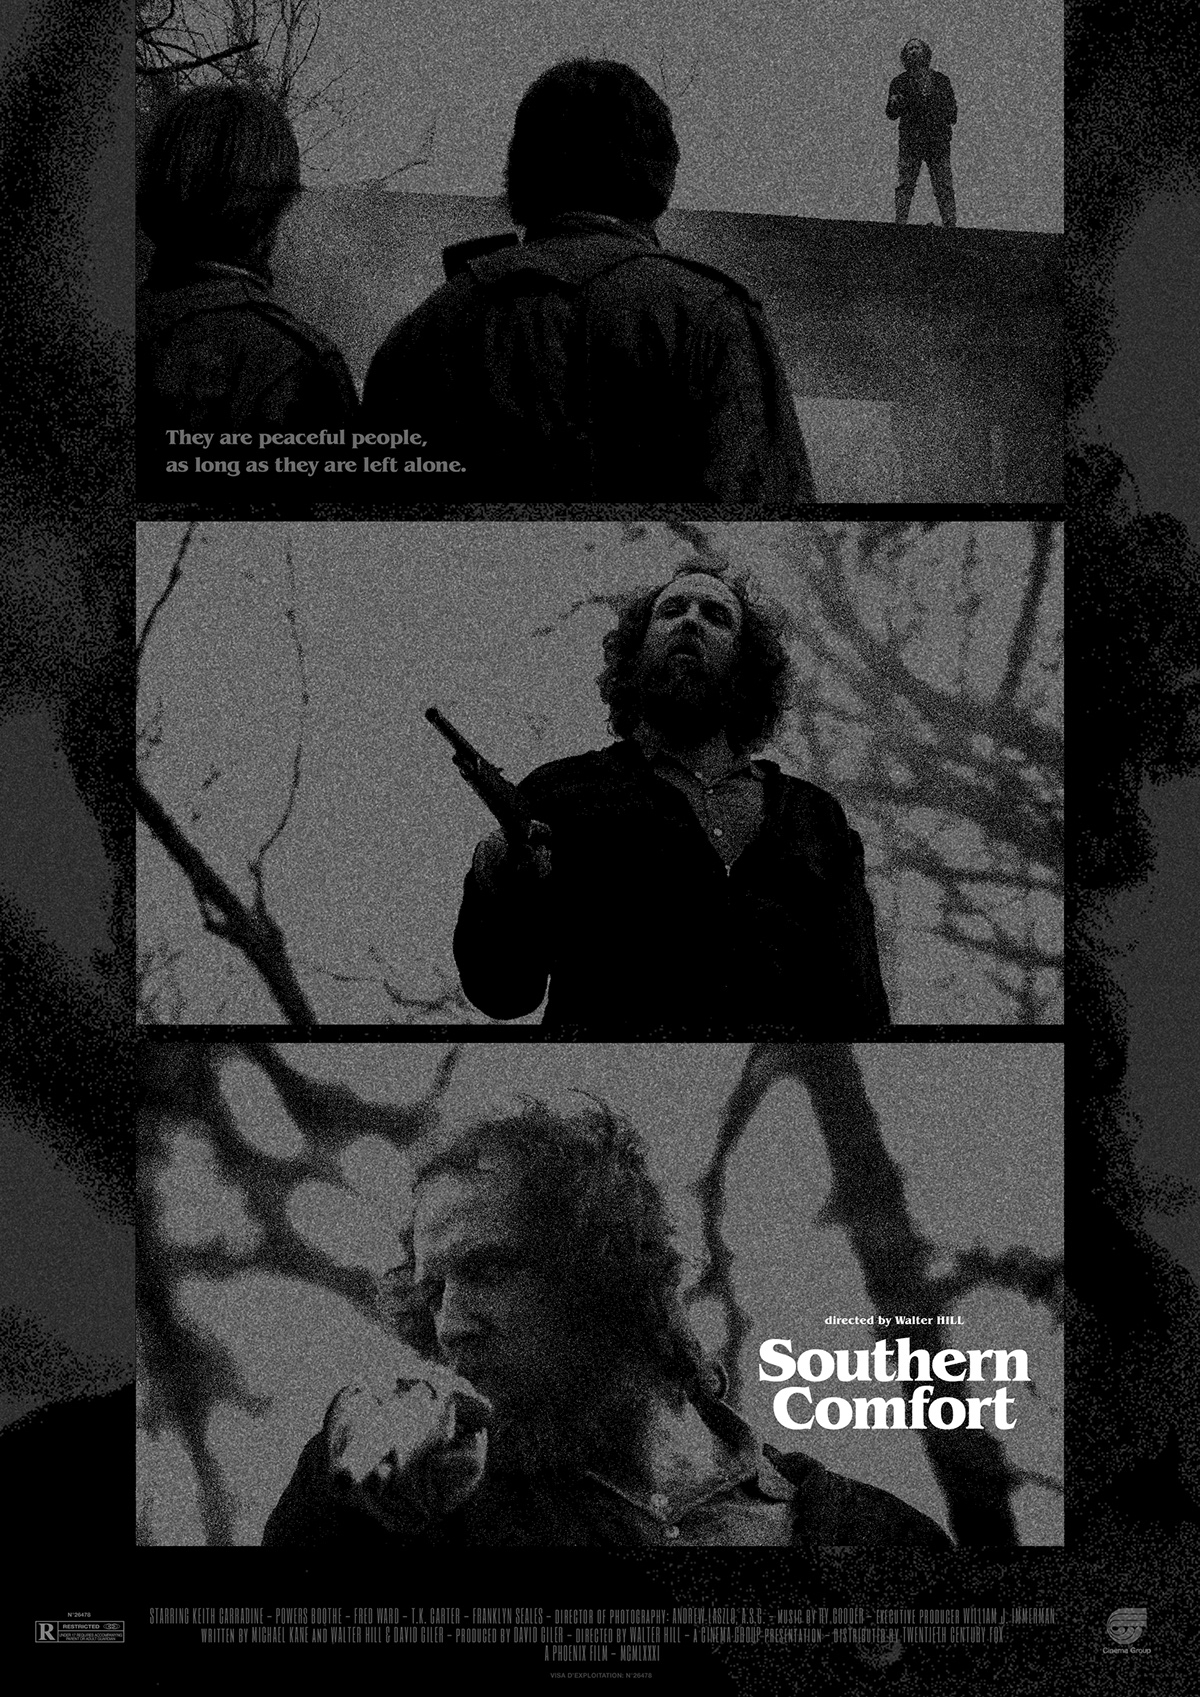 southern comfort southern comfort movie poster movie poster tribute walter hill Bayou cajun redneck US ARMY Military steve marchal datalaze